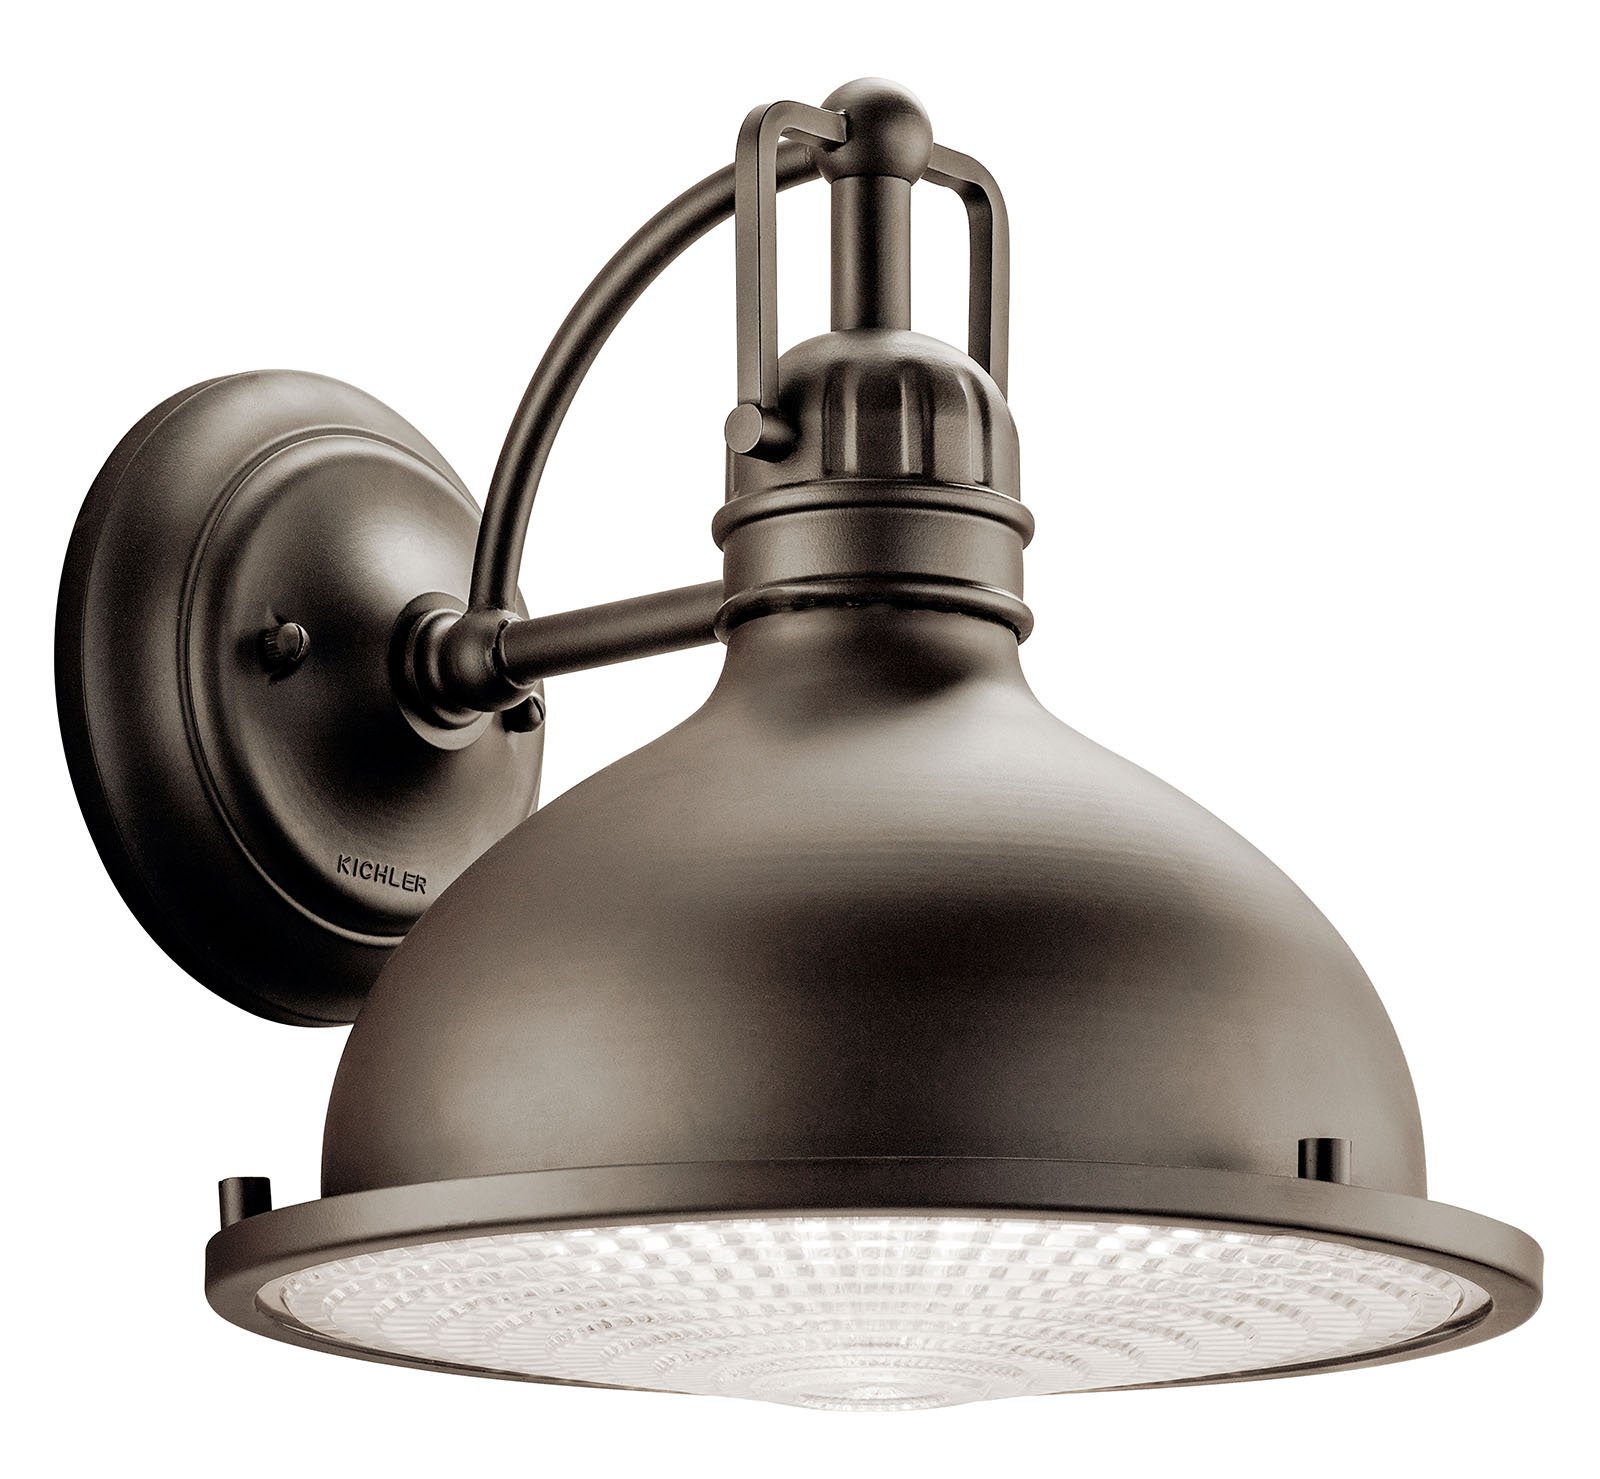 The Hatteras Bay(TM) 10.25in. 1 light Exterior Wall Light features a classic industrial look with its Olde Bronze(R) finish and clear fresnel lens. The Hatteras Bay(TM) exterior wall light is perfect to help illuminate areas where guests will be entering and exiting the home such as doorways and garages.